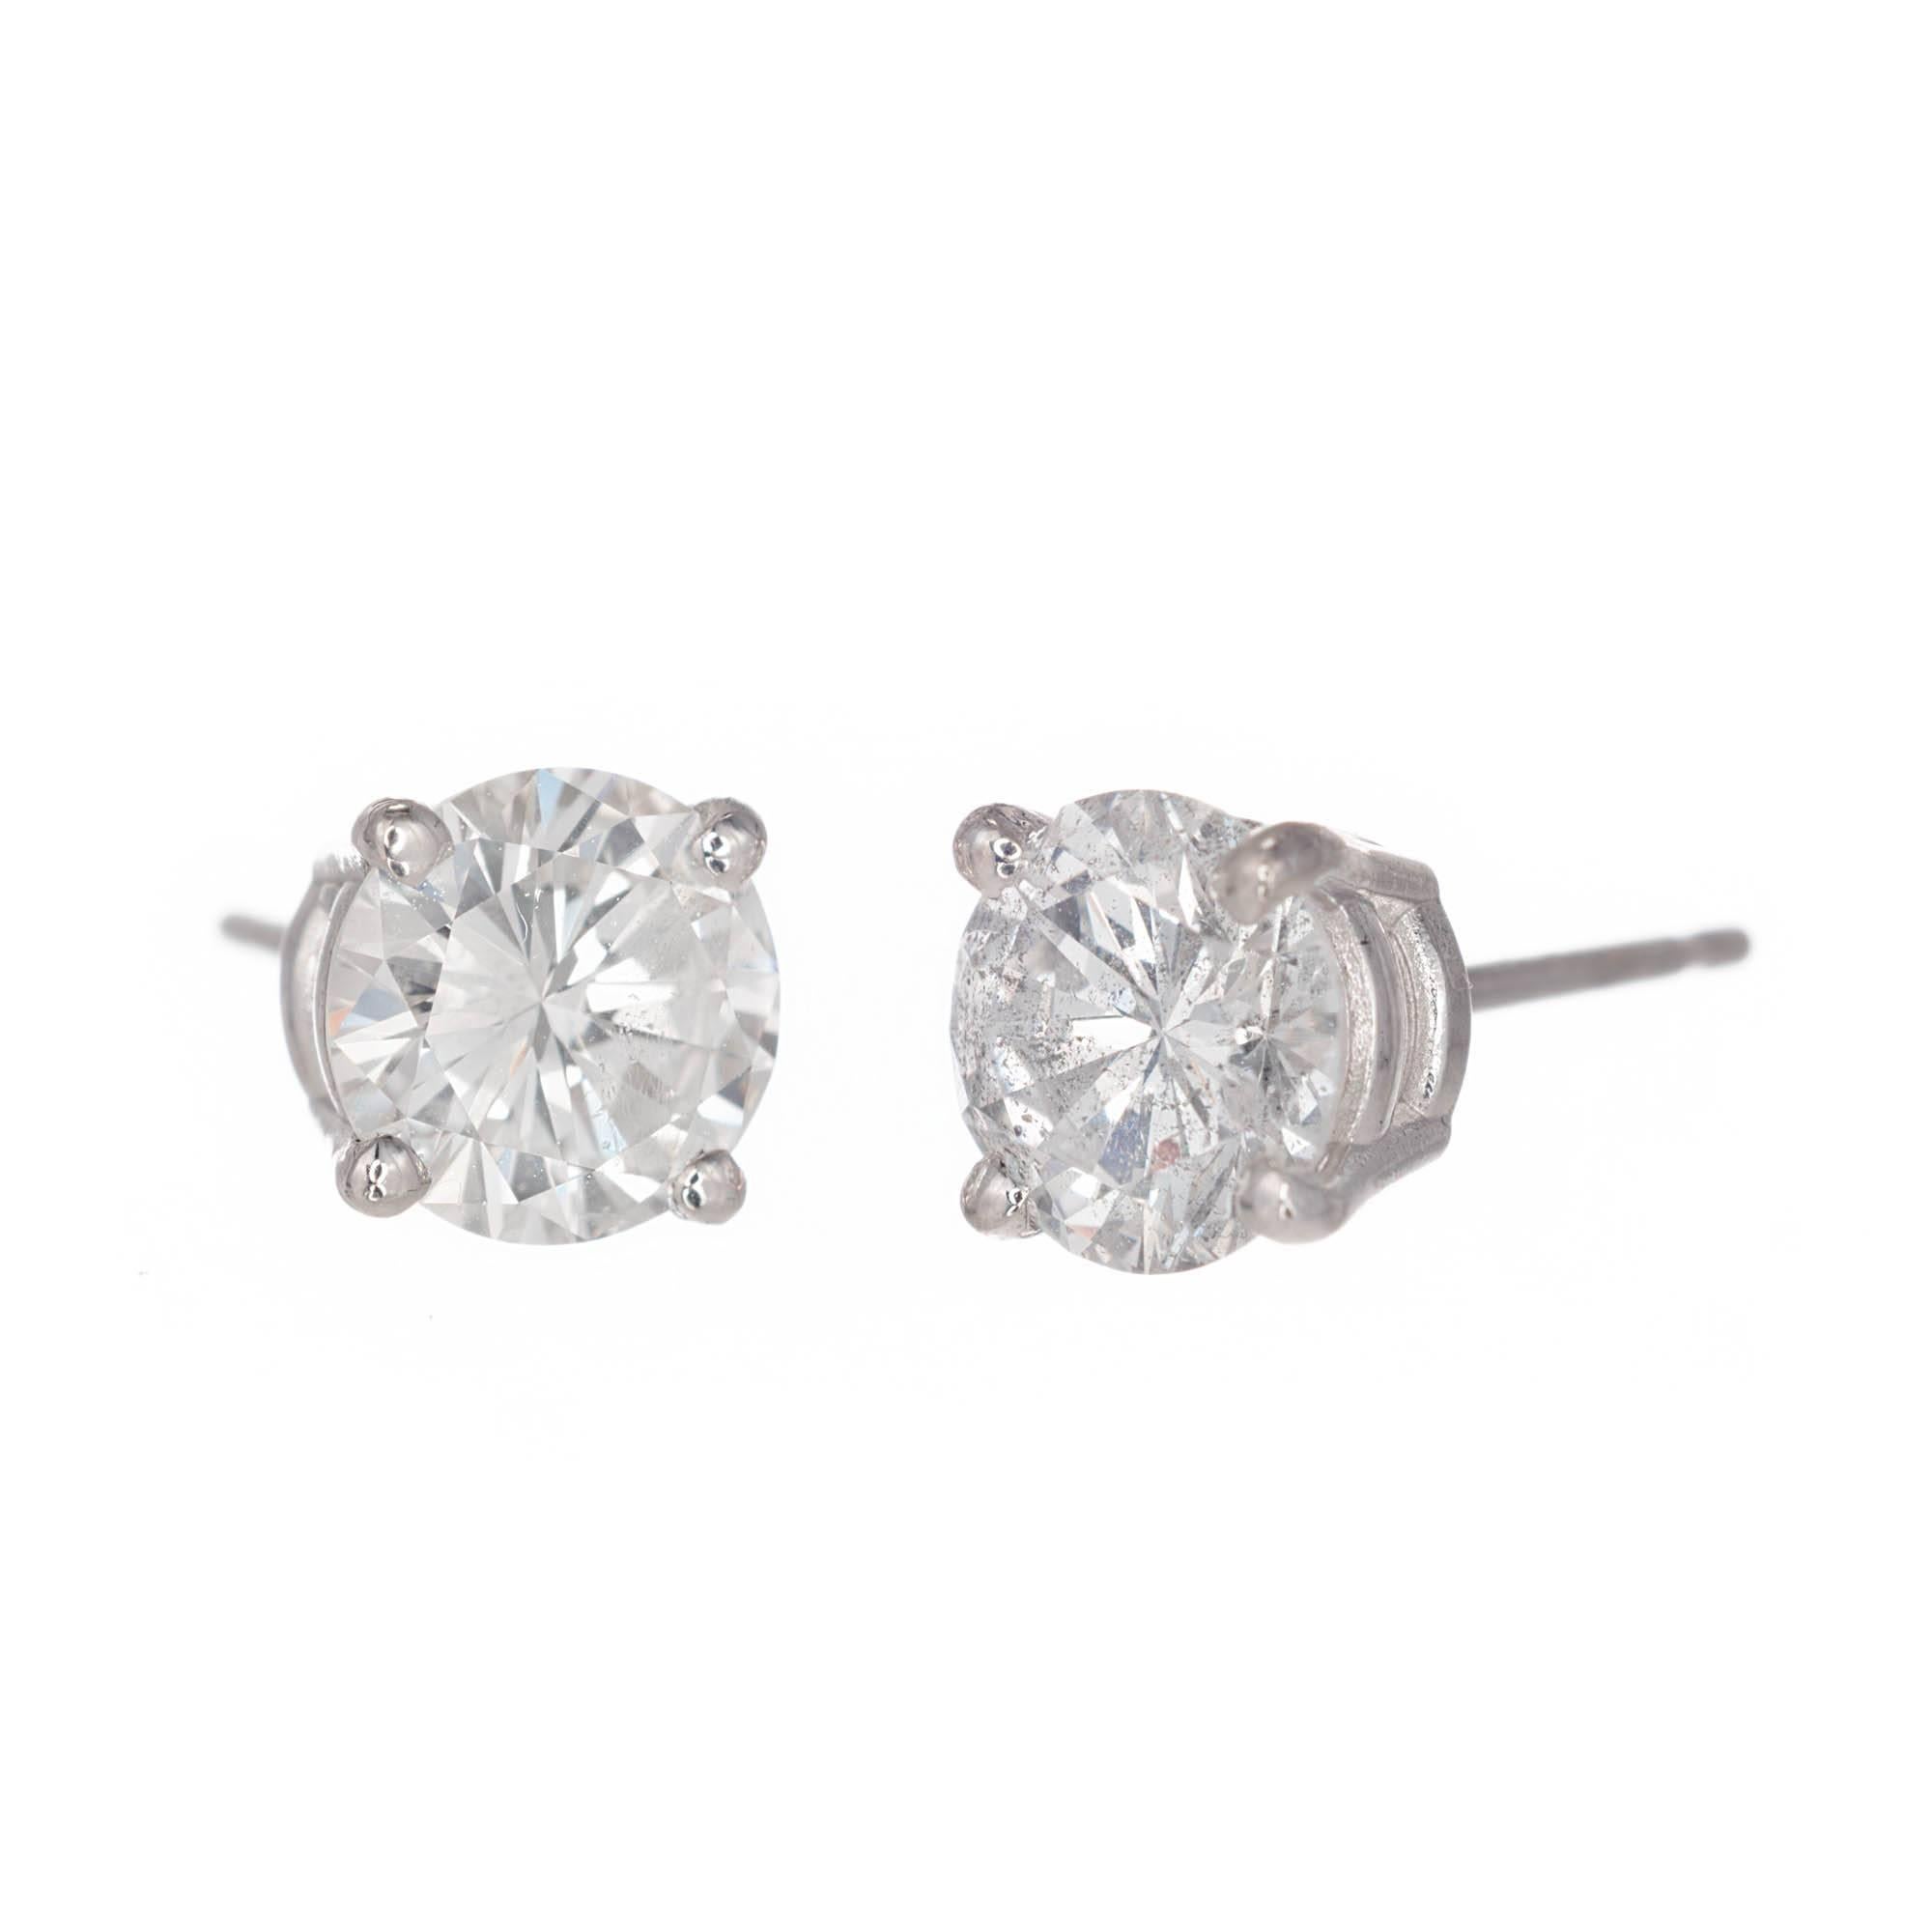 Round brilliant cut diamond stud earrings set in a 14k white gold four prong setting. EGL certified.

1 round diamond H-I I 5.9-5.86 x 3.50 approximate .72 carats. EGL Certificate # US 314545202J
1 round diamond F-G I 5.89-5.87-3.50mm approximate